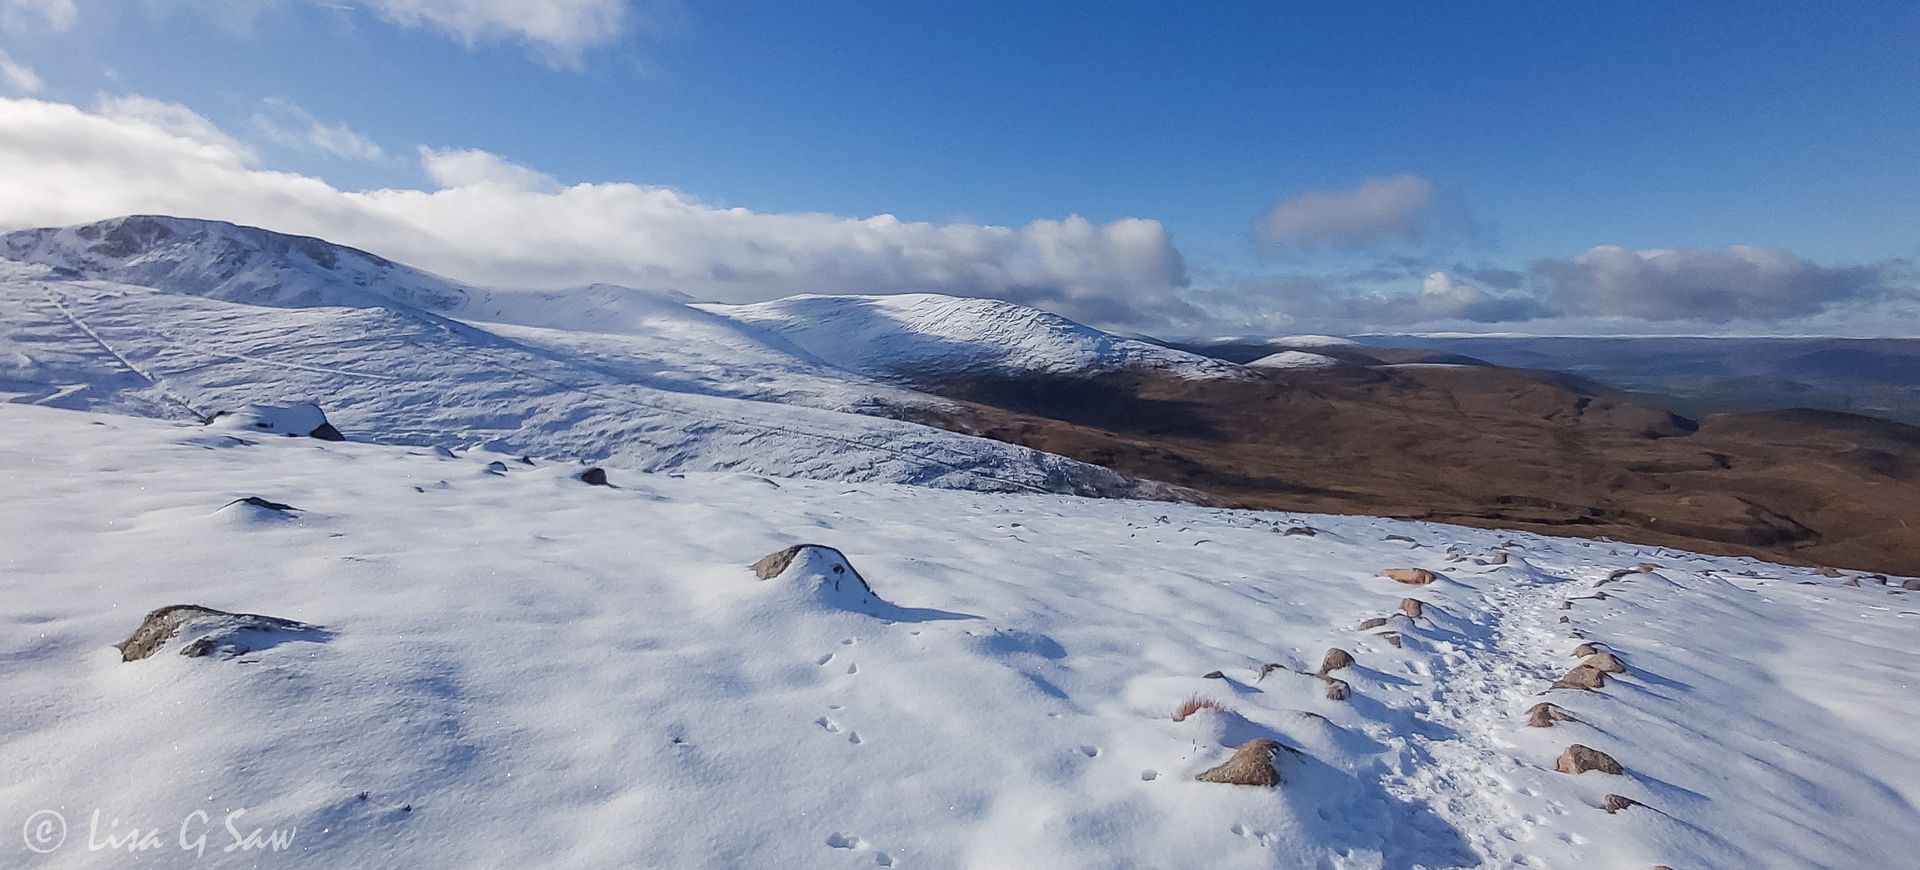 Snow on the peaks of the Cairngorms